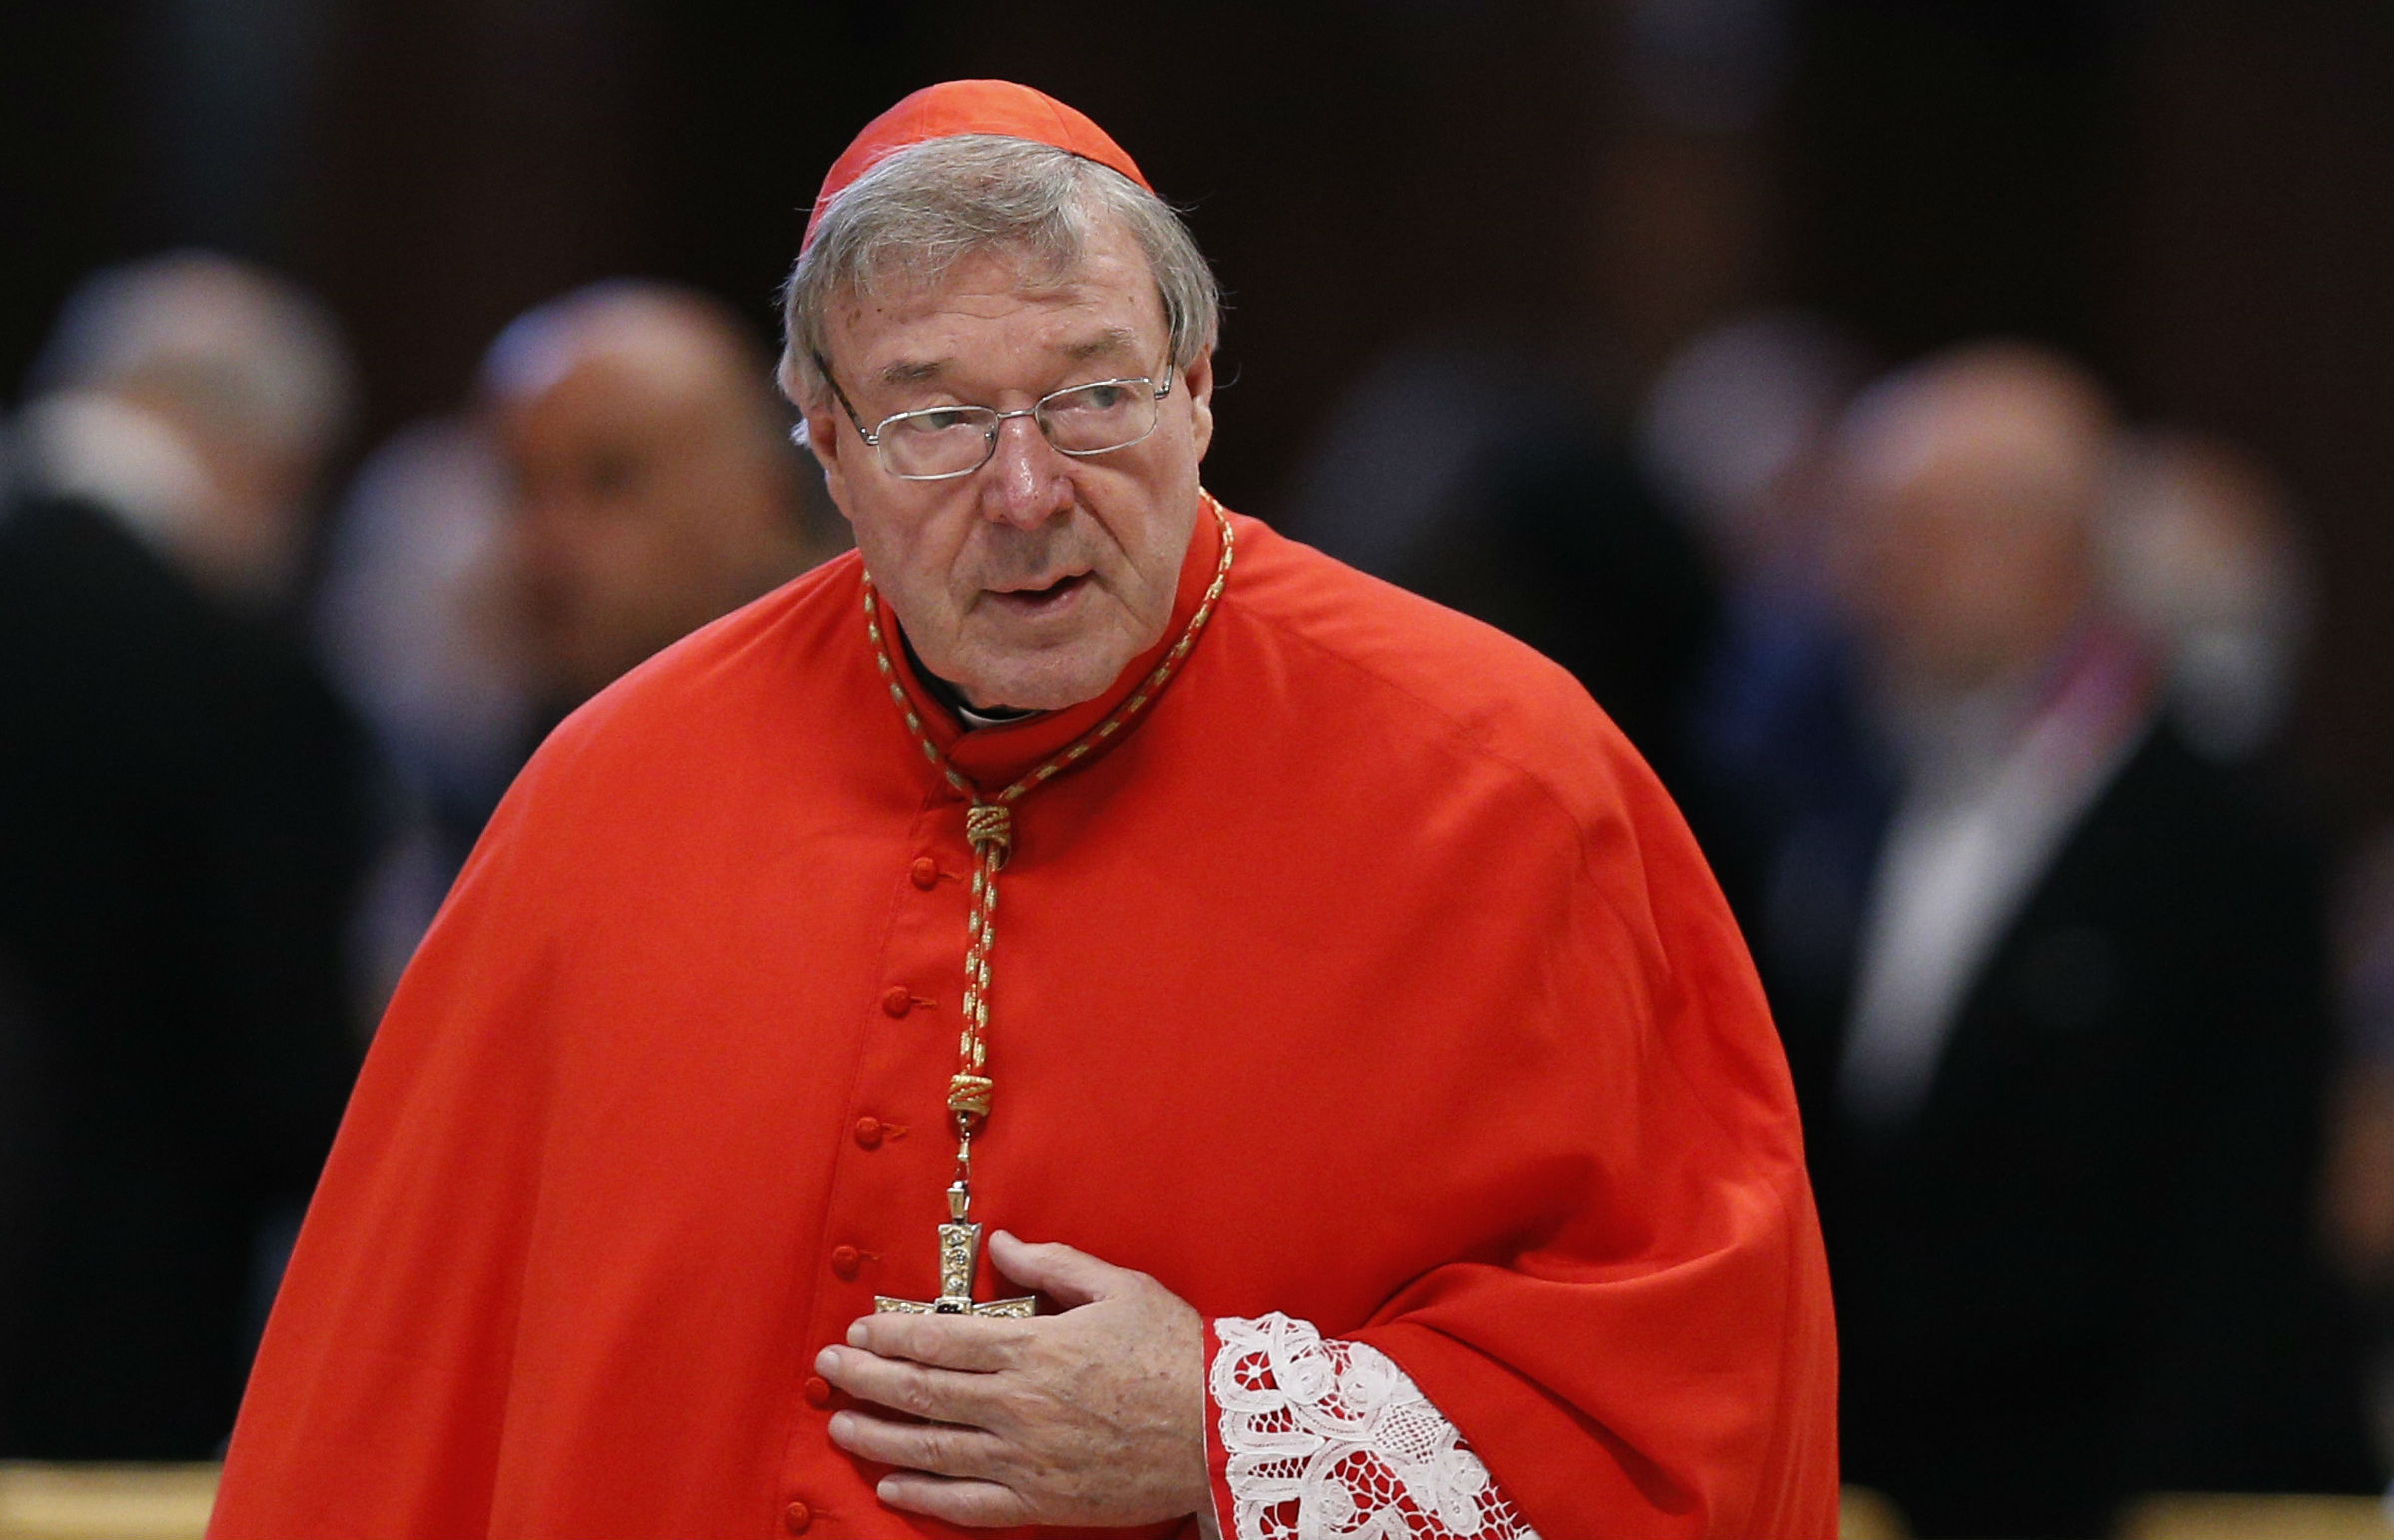 Cardinal George Pell: The towering figure who divides Australians